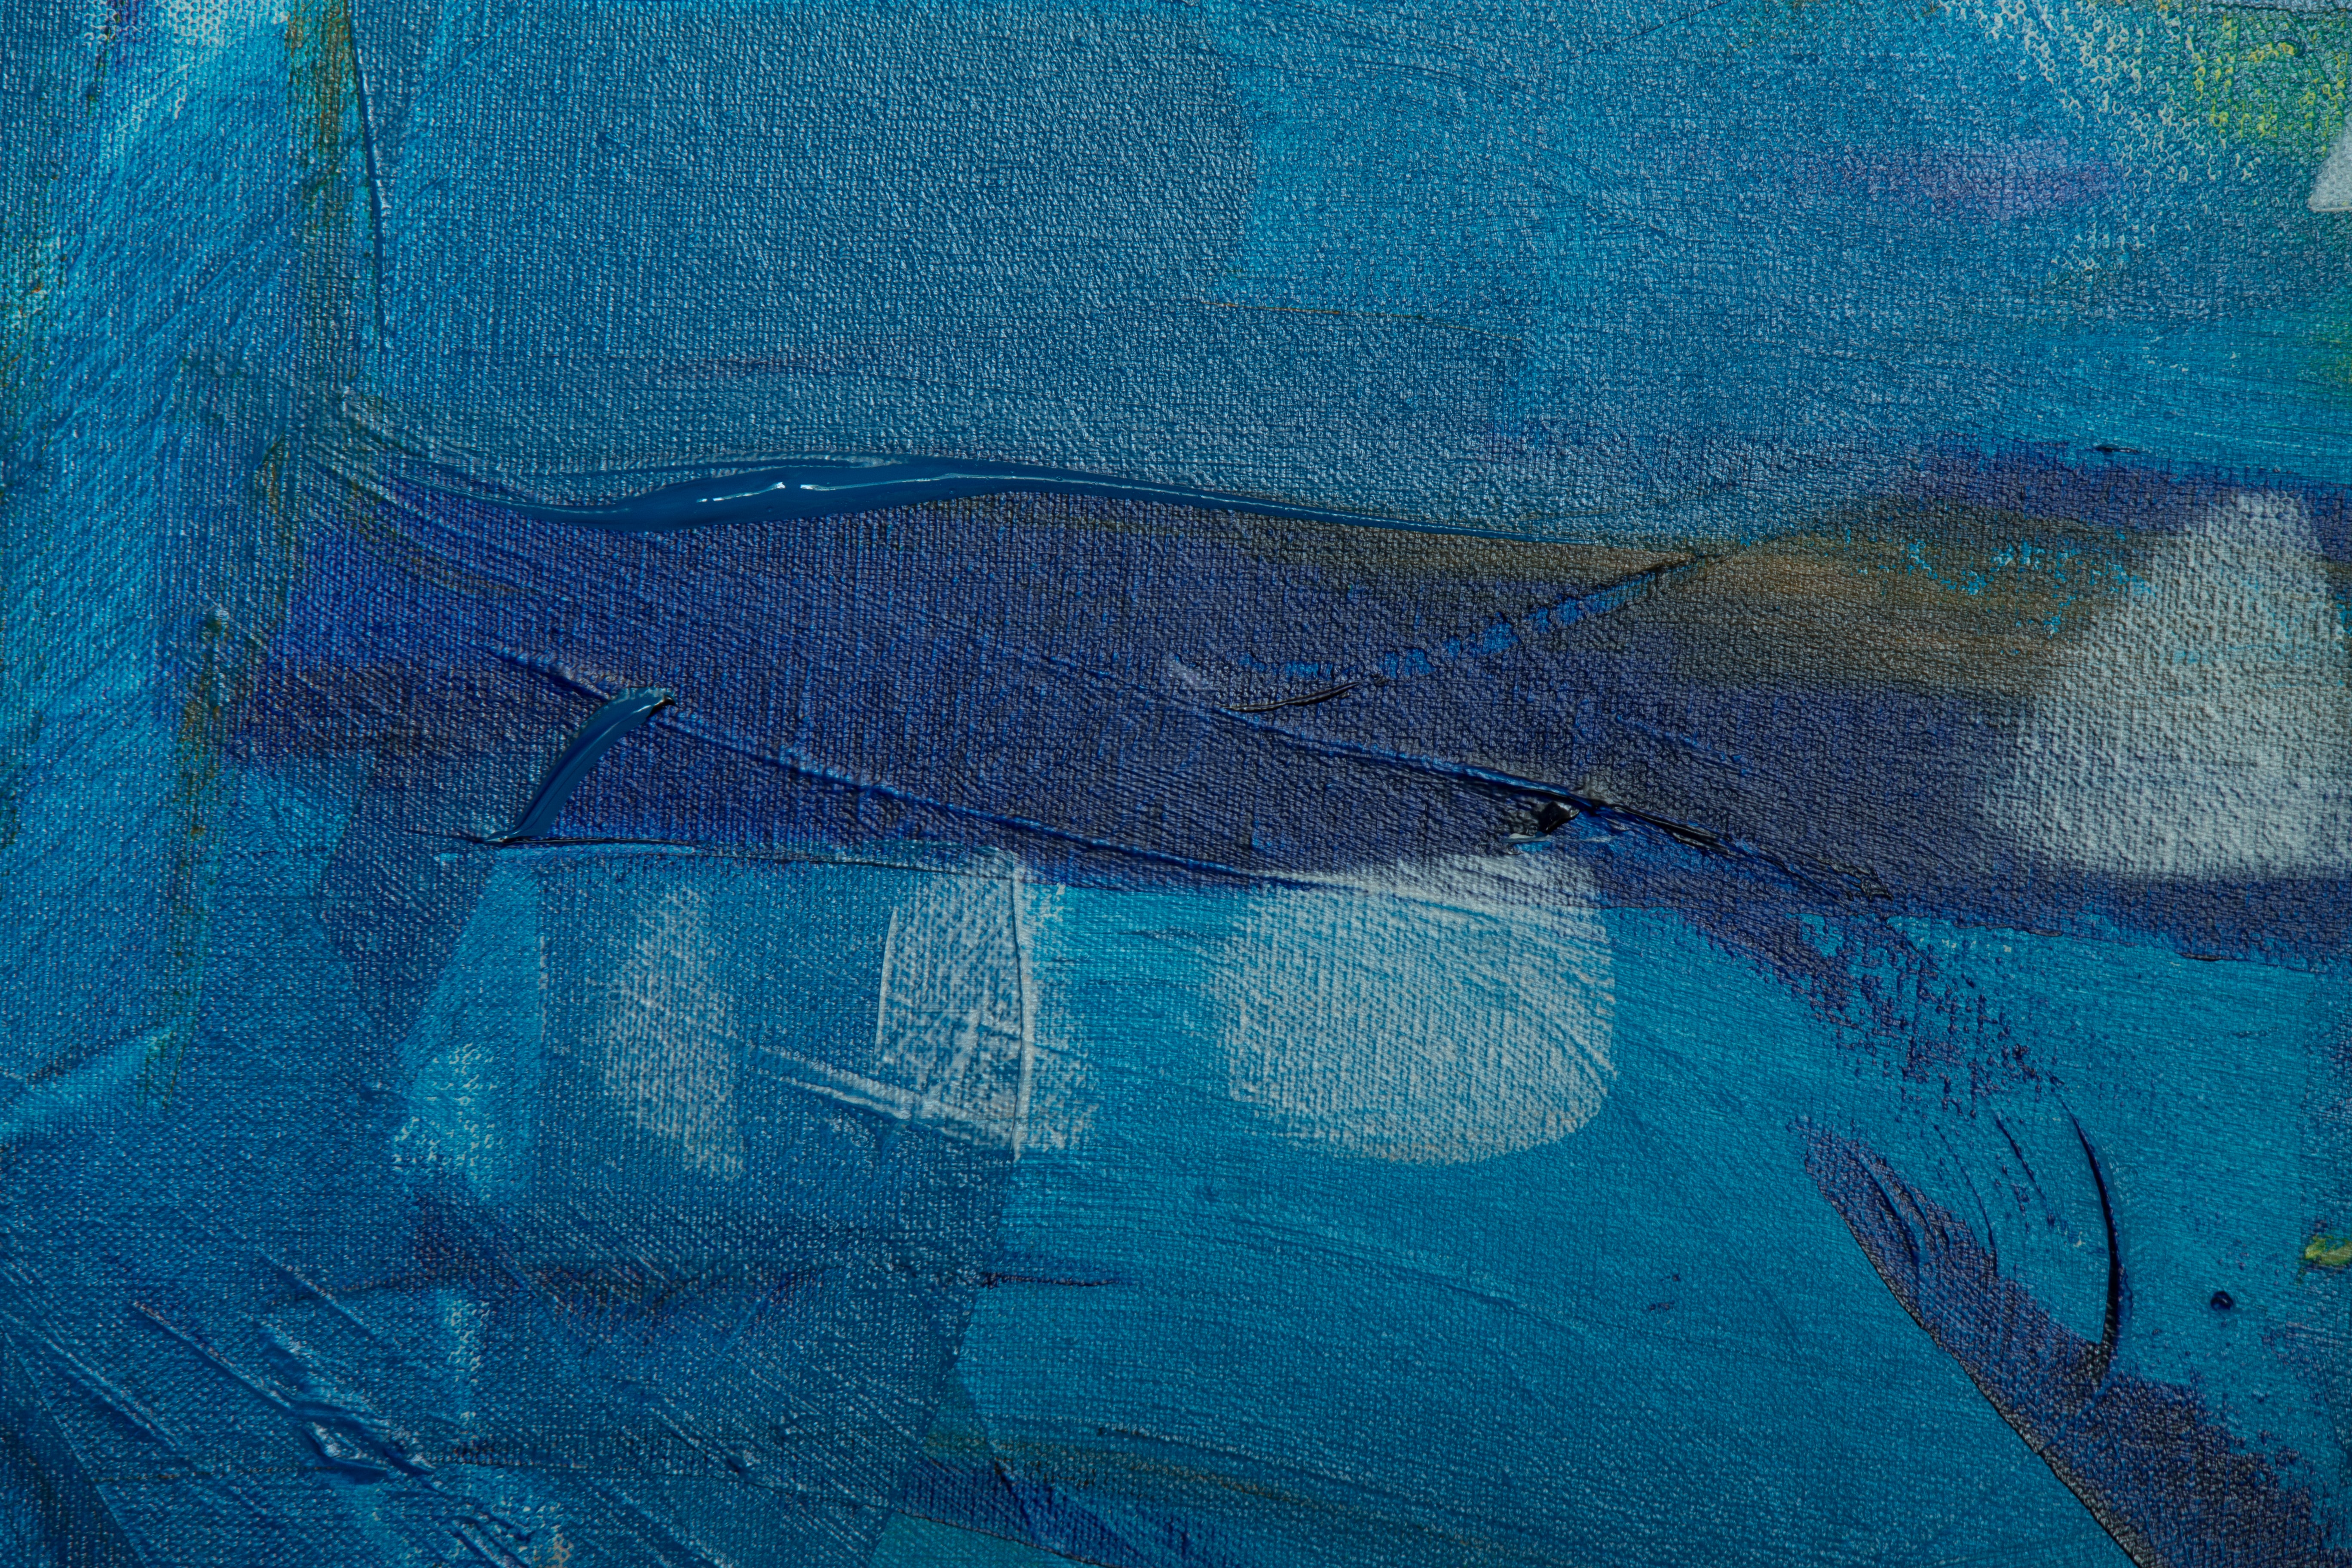 paint, blue, canvas, abstract